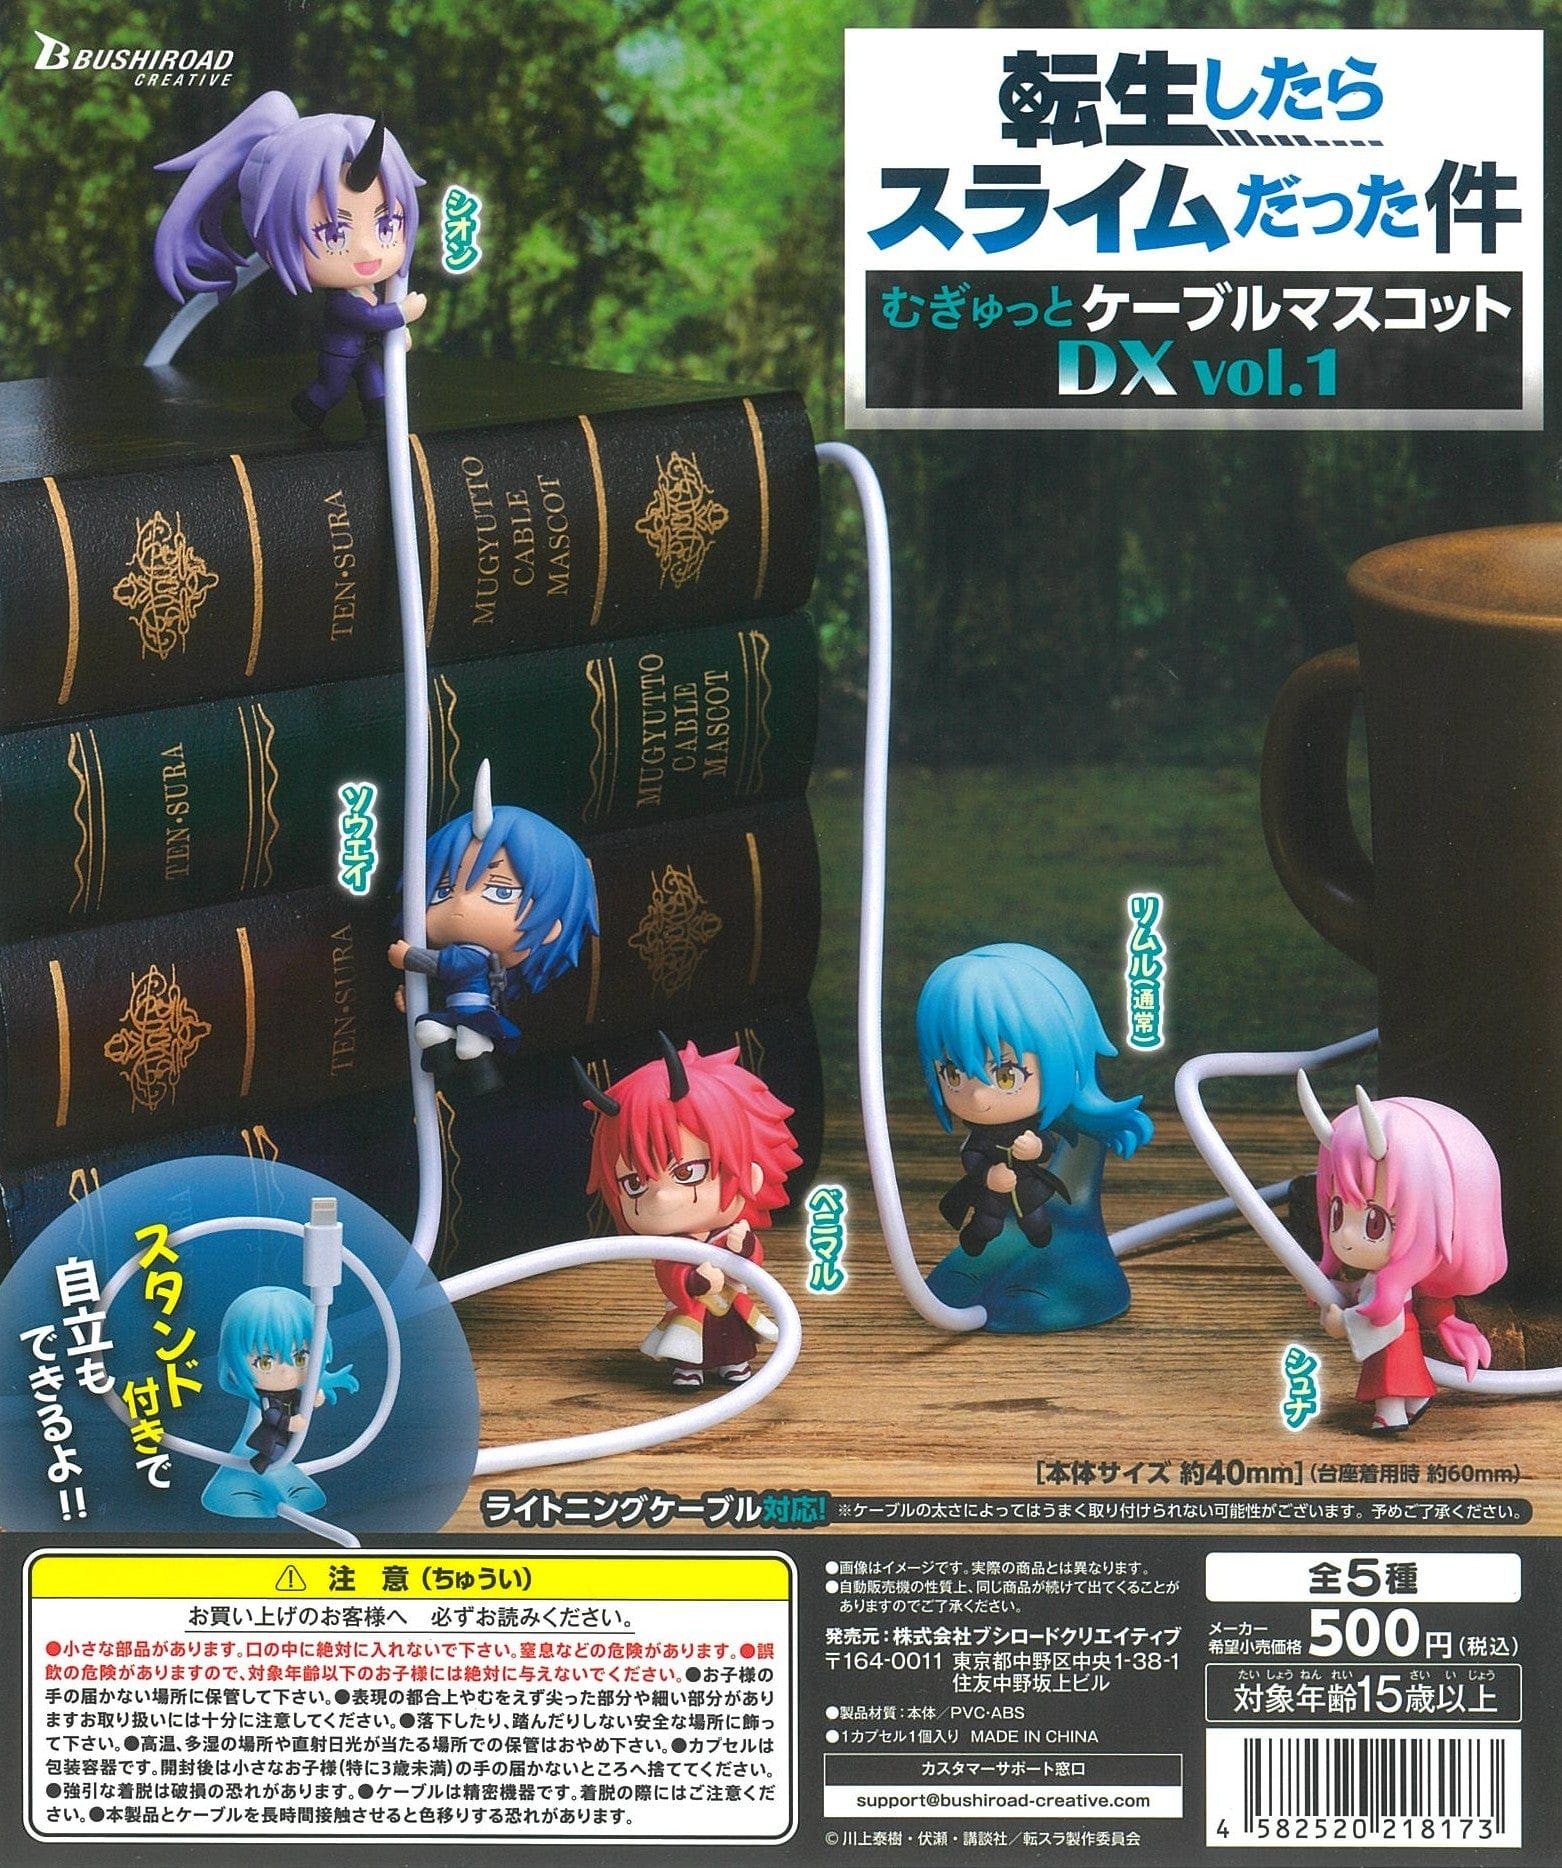 Bushiroad Creative CP1515 That Time I Got Reincarnated as a Slime Mugyutto Cable Mascot DX Vol. 1